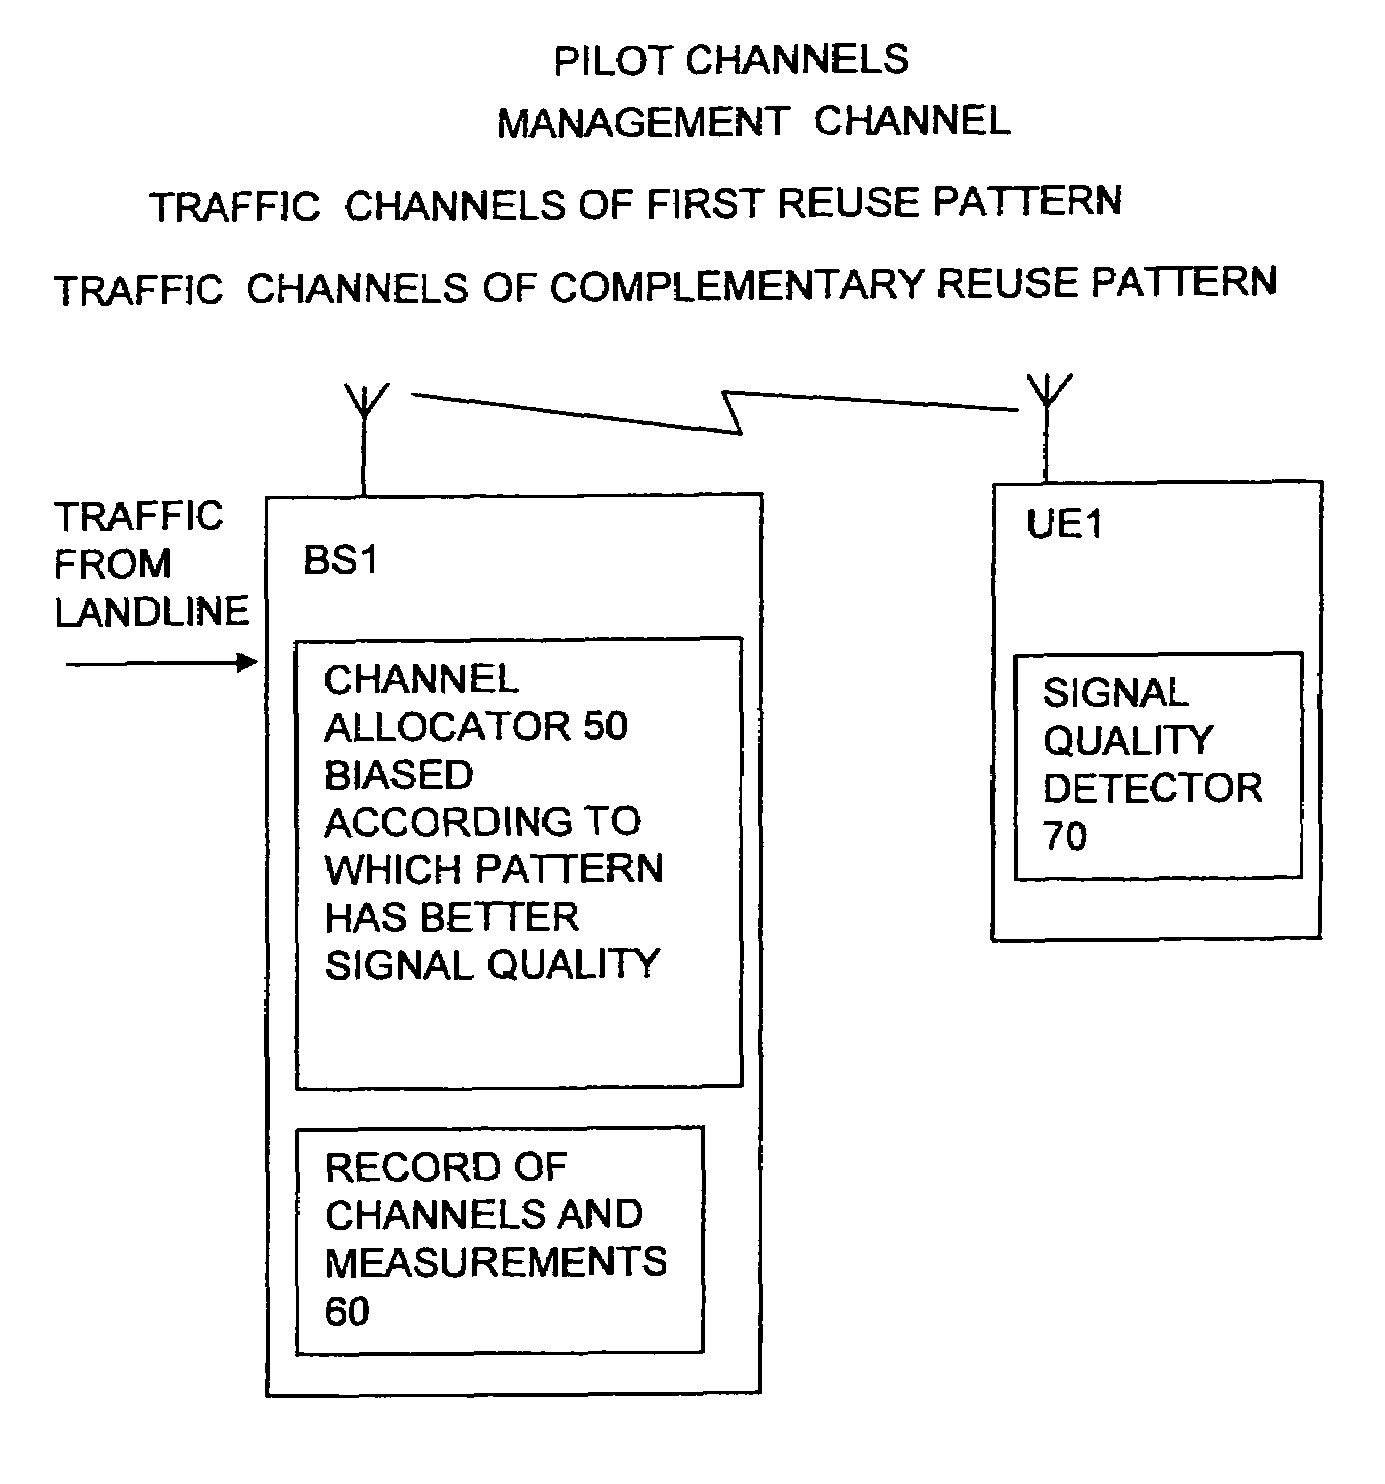 Multiple reuse patterns for channels of wireless networks